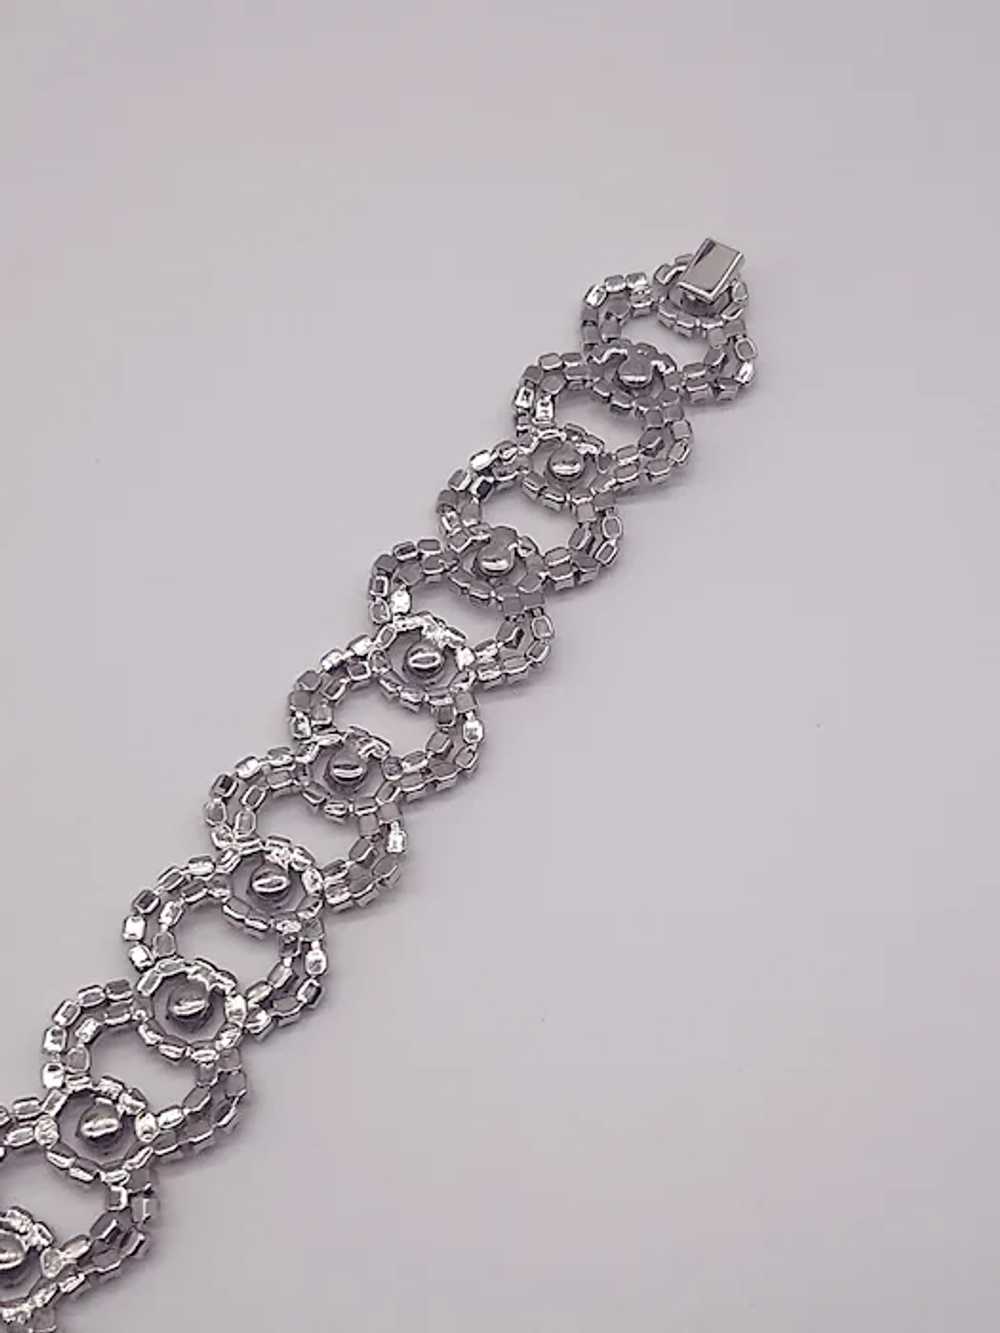 Vintage clear silver tone chocker necklace - image 6